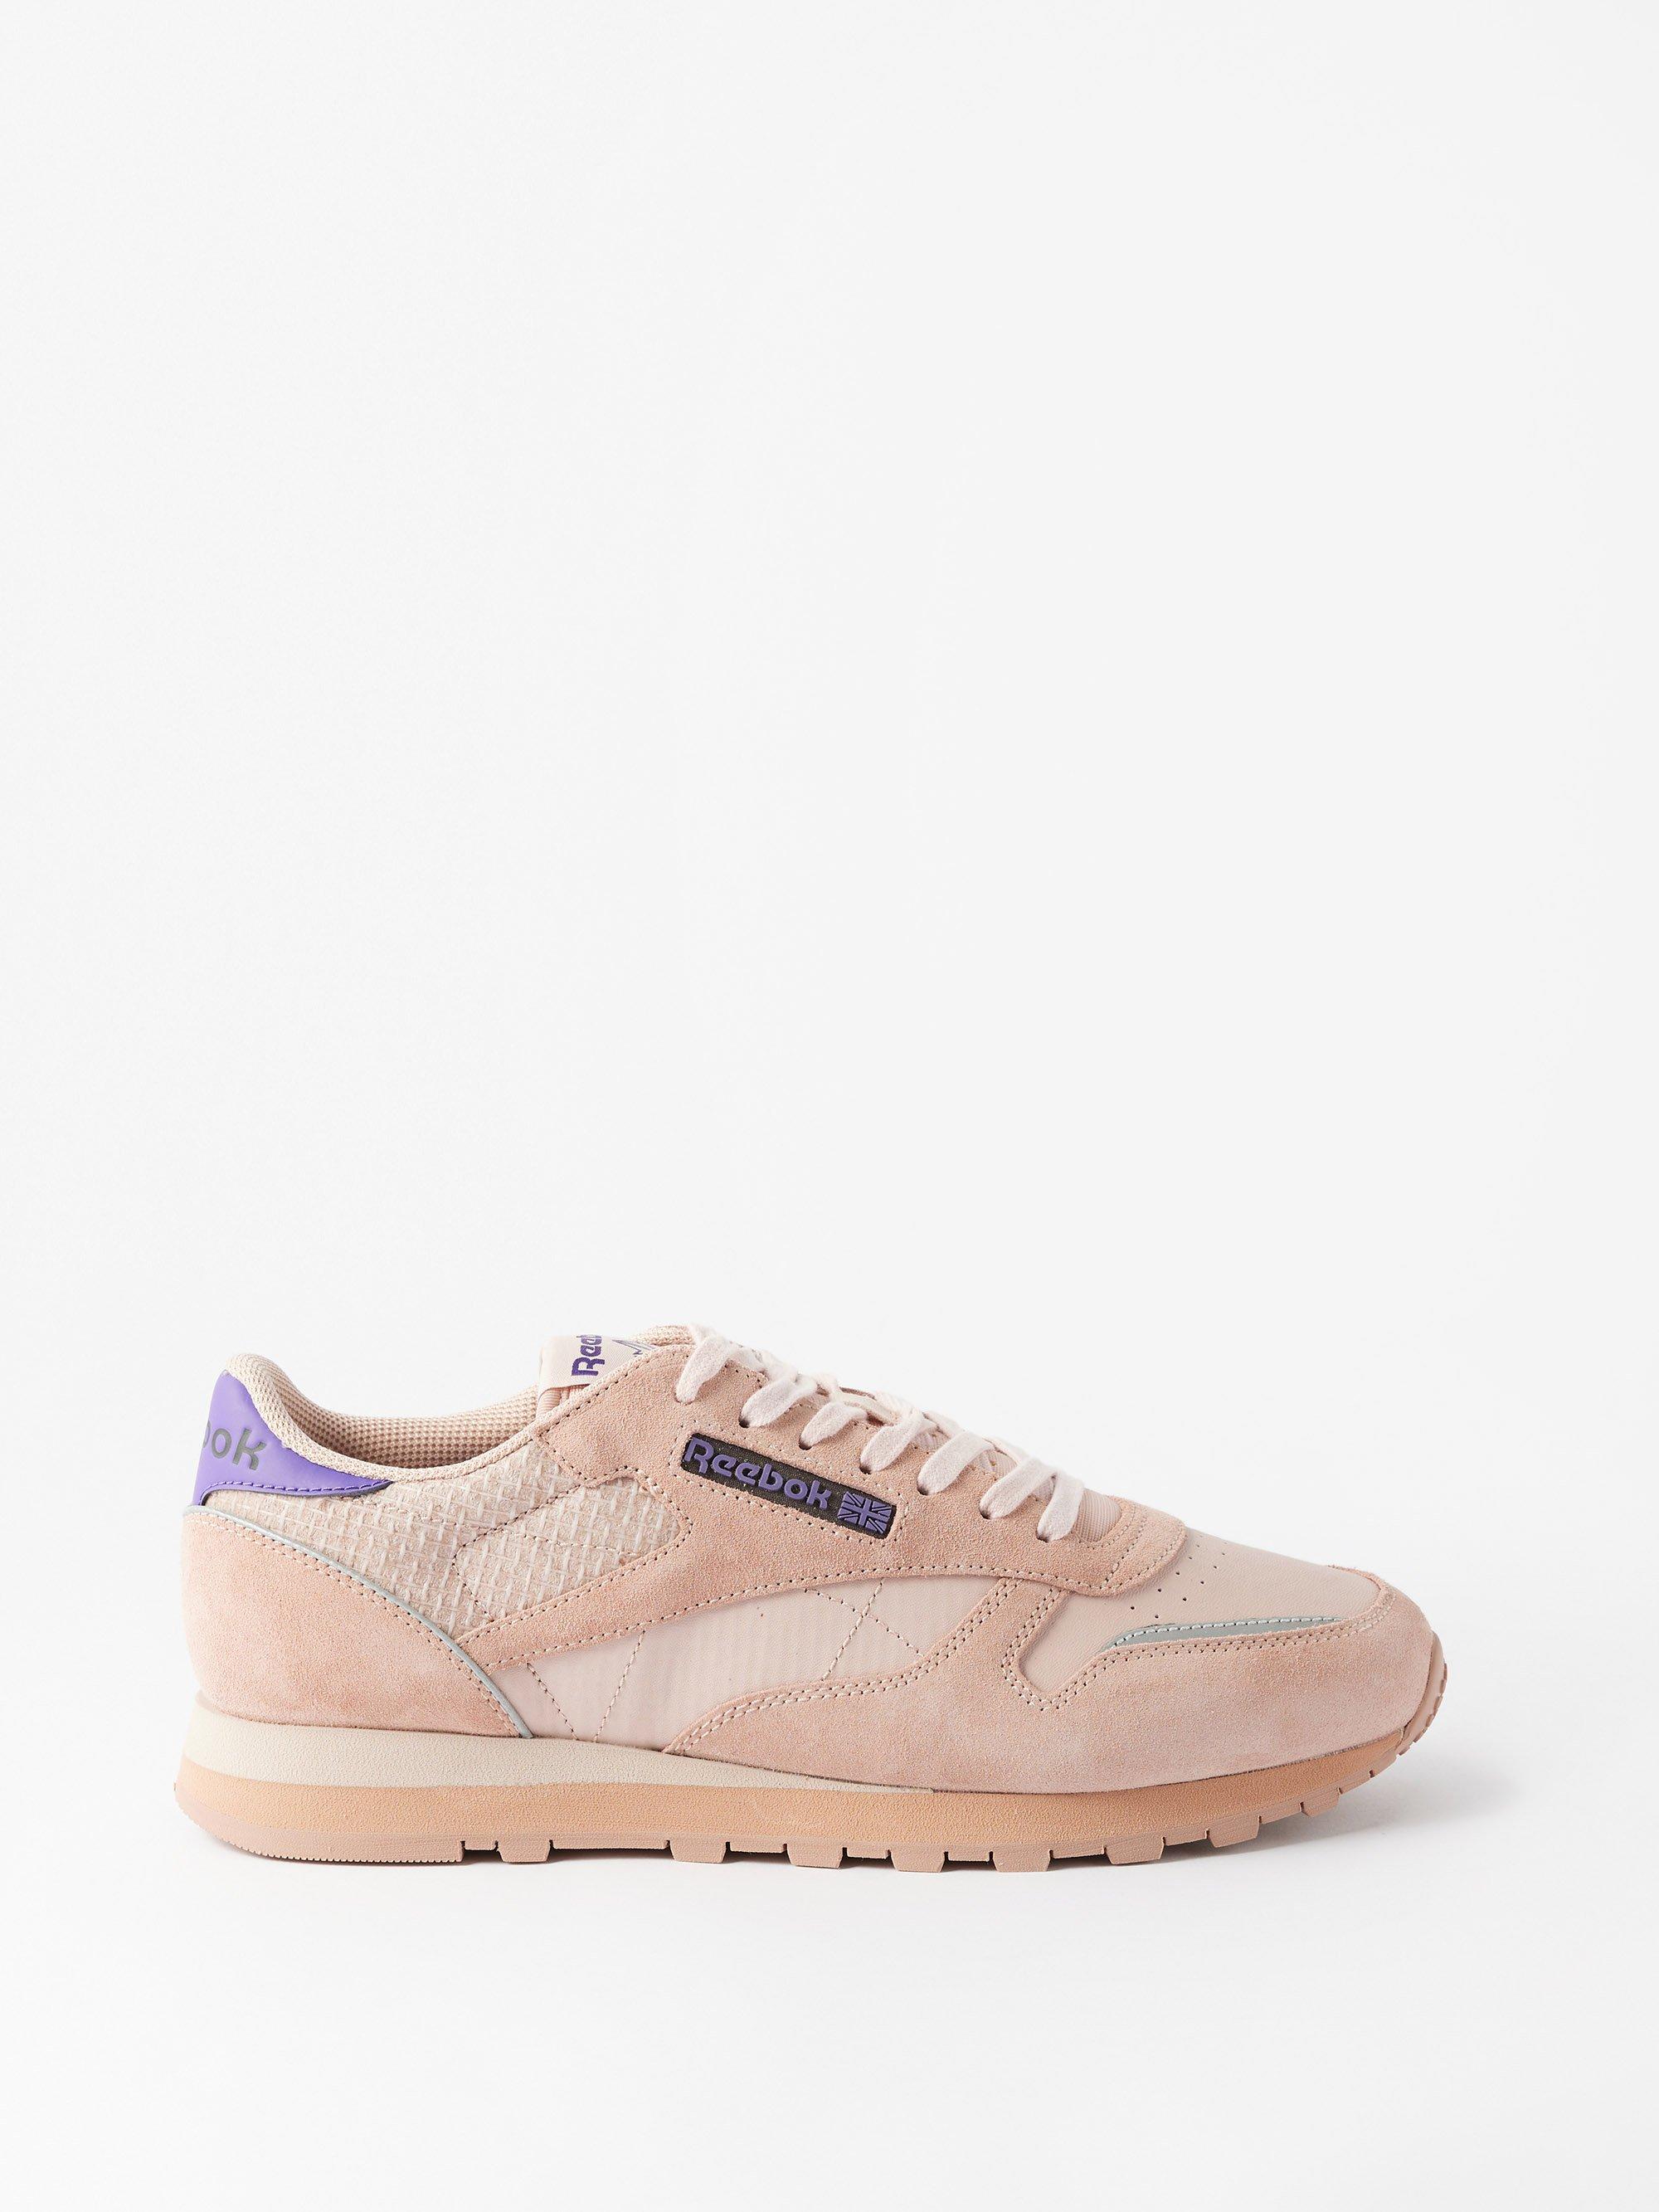 Reebok Classic Suede, Mesh And Leather Trainers in Pink | Lyst Australia